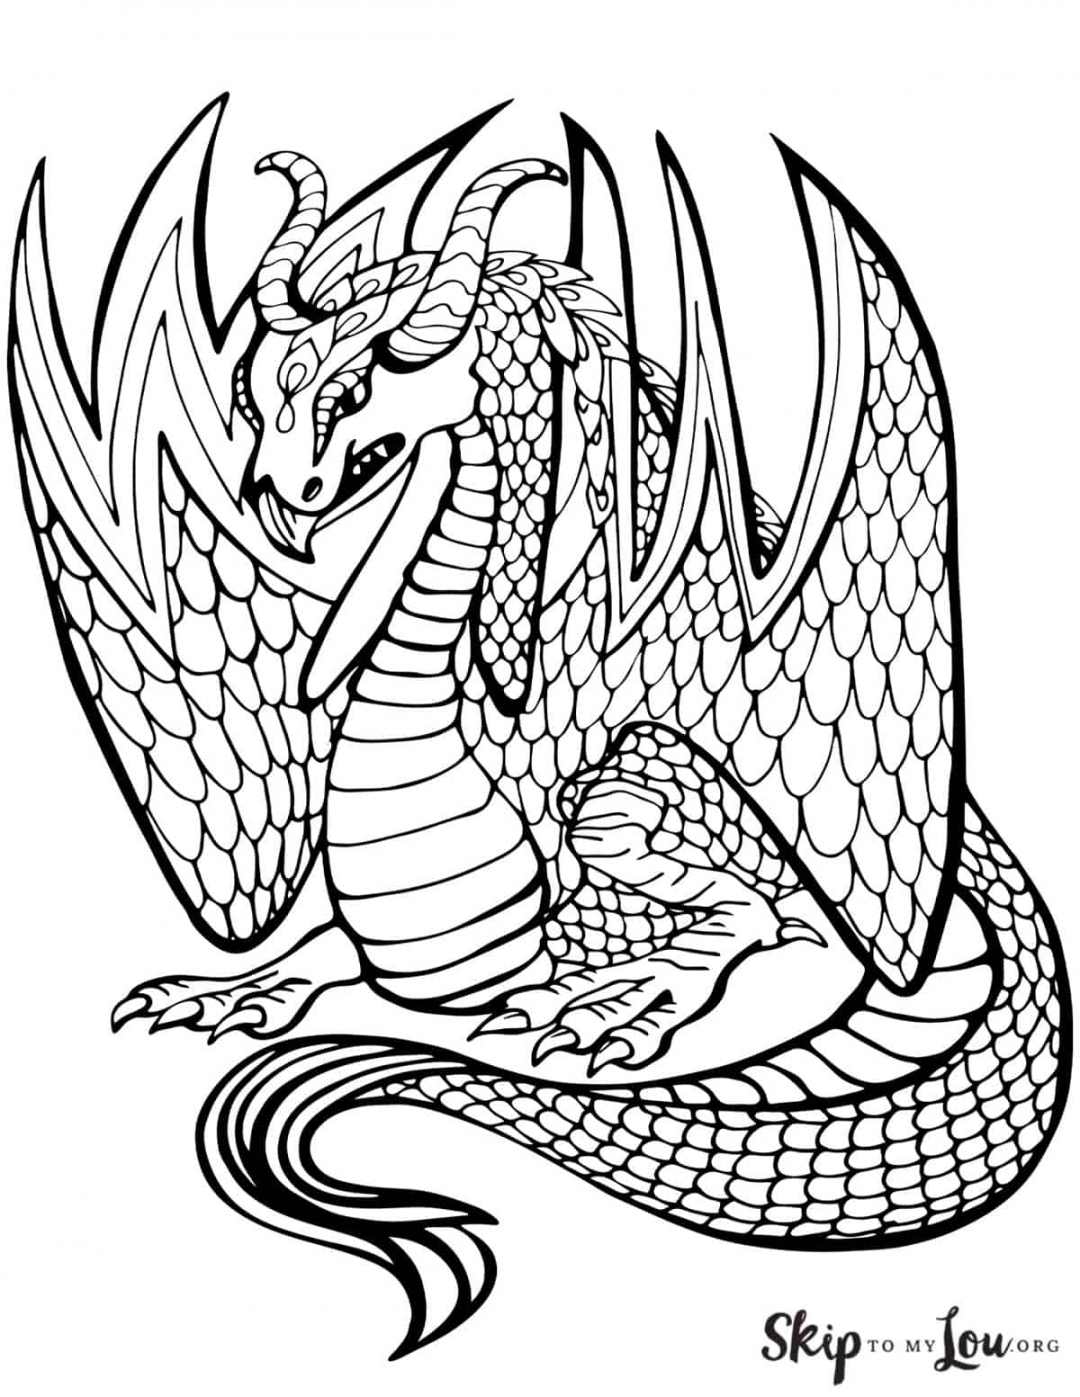 Dragon Coloring Pages  Skip To My Lou - FREE Printables - Free Printable Dragon Coloring Pages